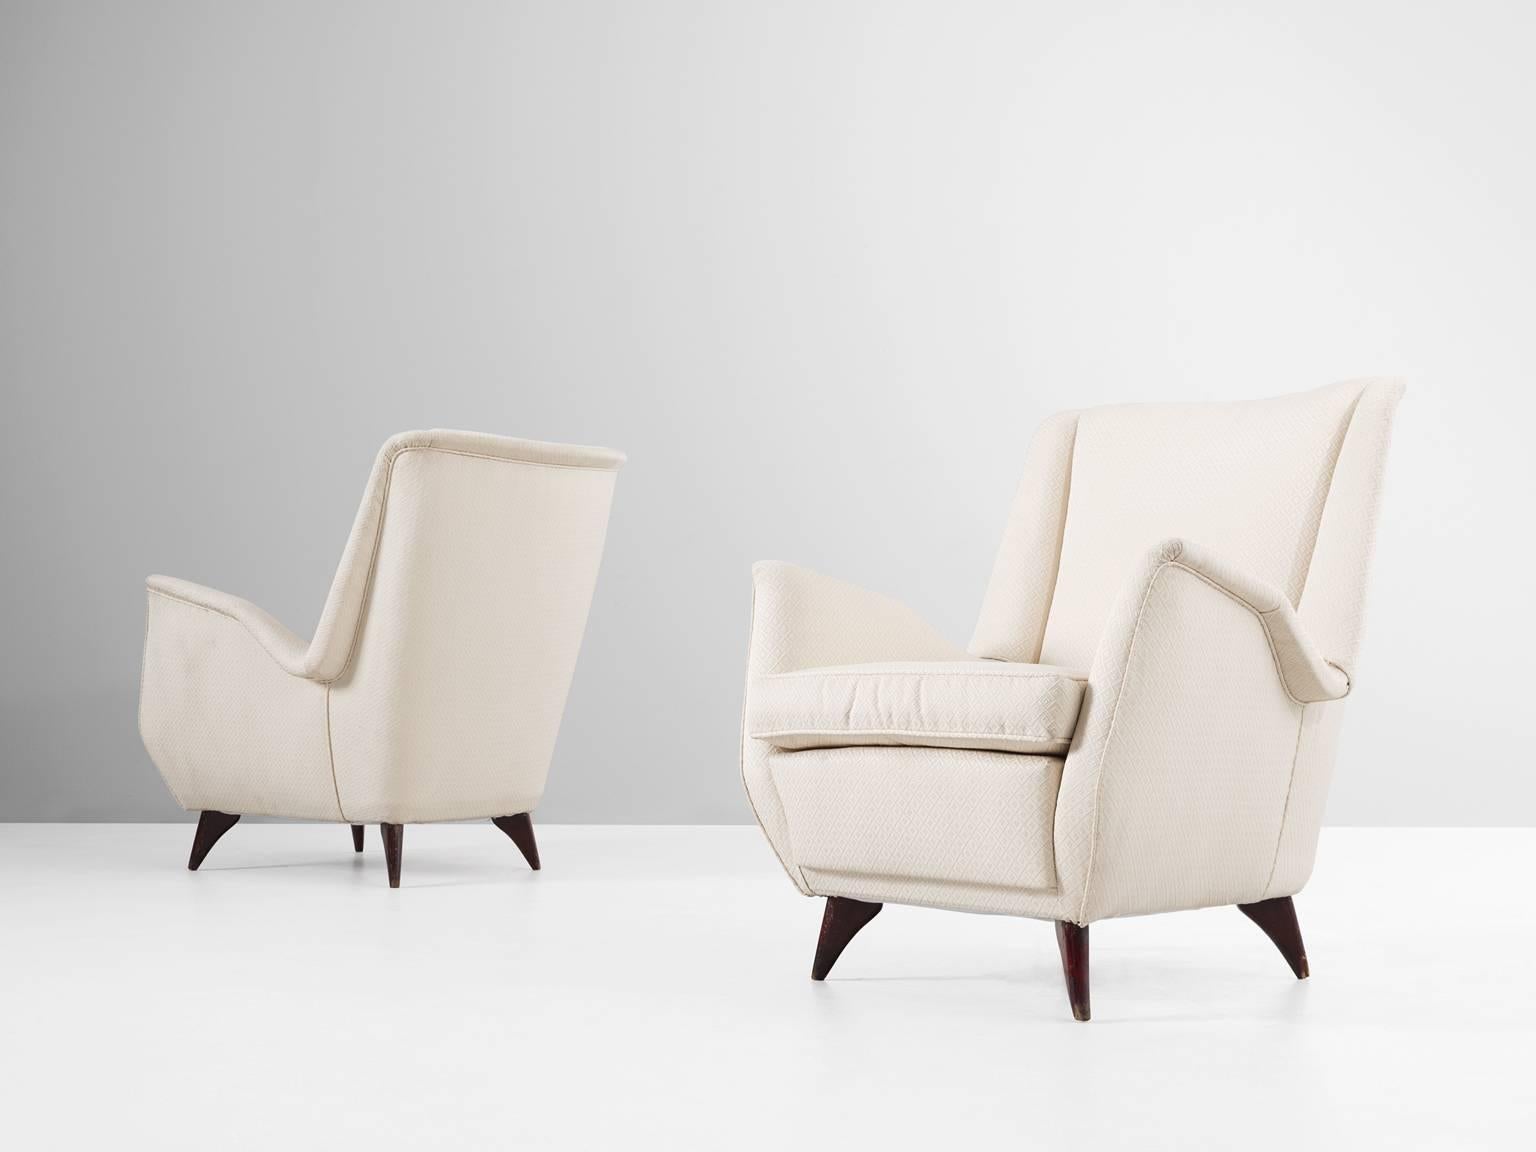 Set of two lounge chairs, in wood and fabric, Italy, 1950s.

Two Italian armchairs in off-white pattern fabric. These chairs show beautiful and elegant lines. The wide seating is accomplished with nicely folded armrests. The dark stained wooden